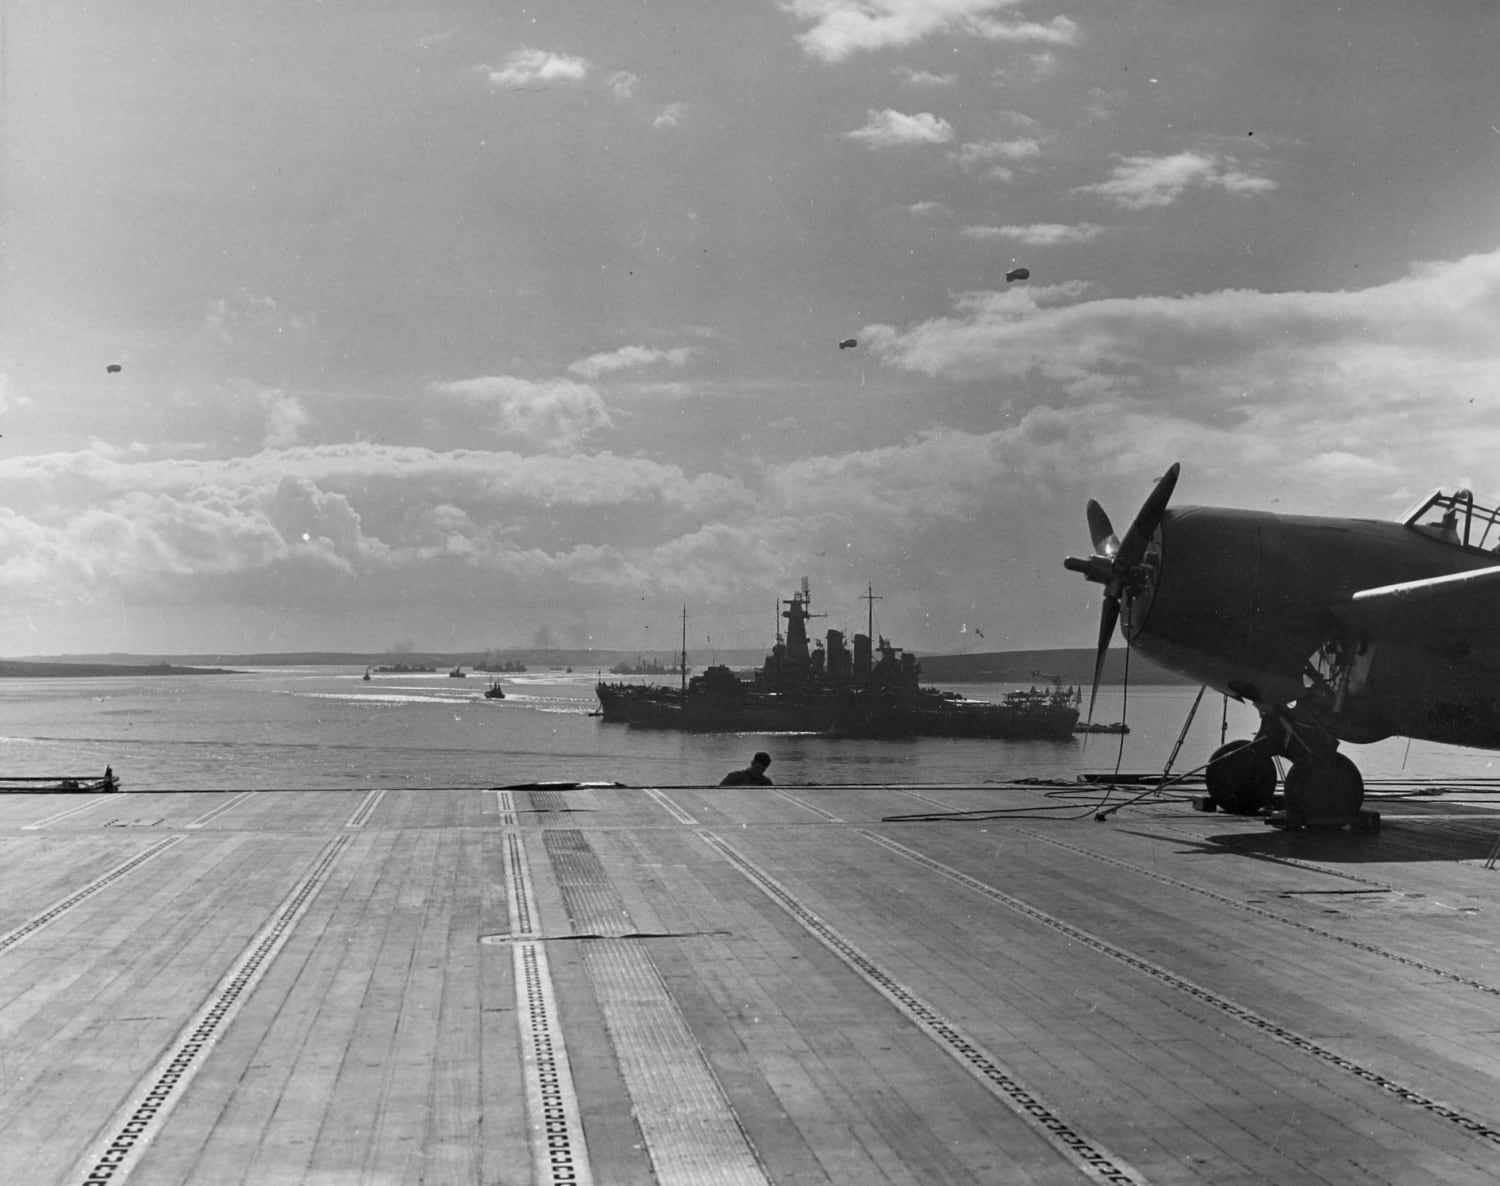 American battleship USS Washington (BB-56) at Scapa Flow in Scotland on 4 April, 1942. The photo was taken from the flight deck of the aircraft carrier USS Wasp (CV-7) during the operation to deliver aircraft from the British Isles to Malta.